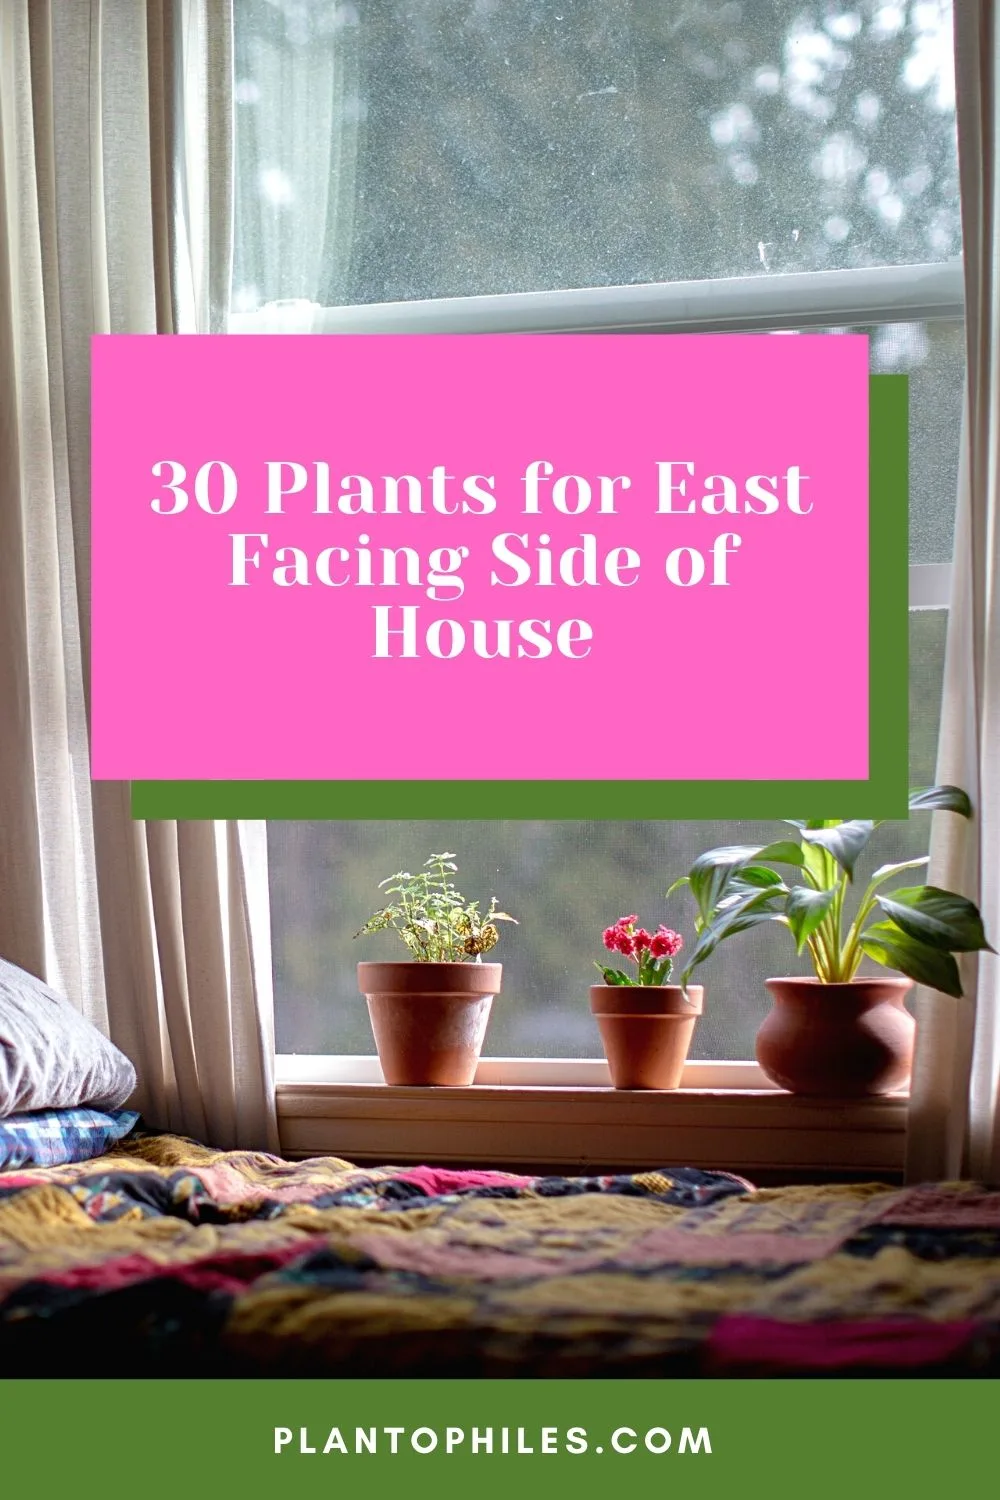 30 Plants for East Facing Side of House